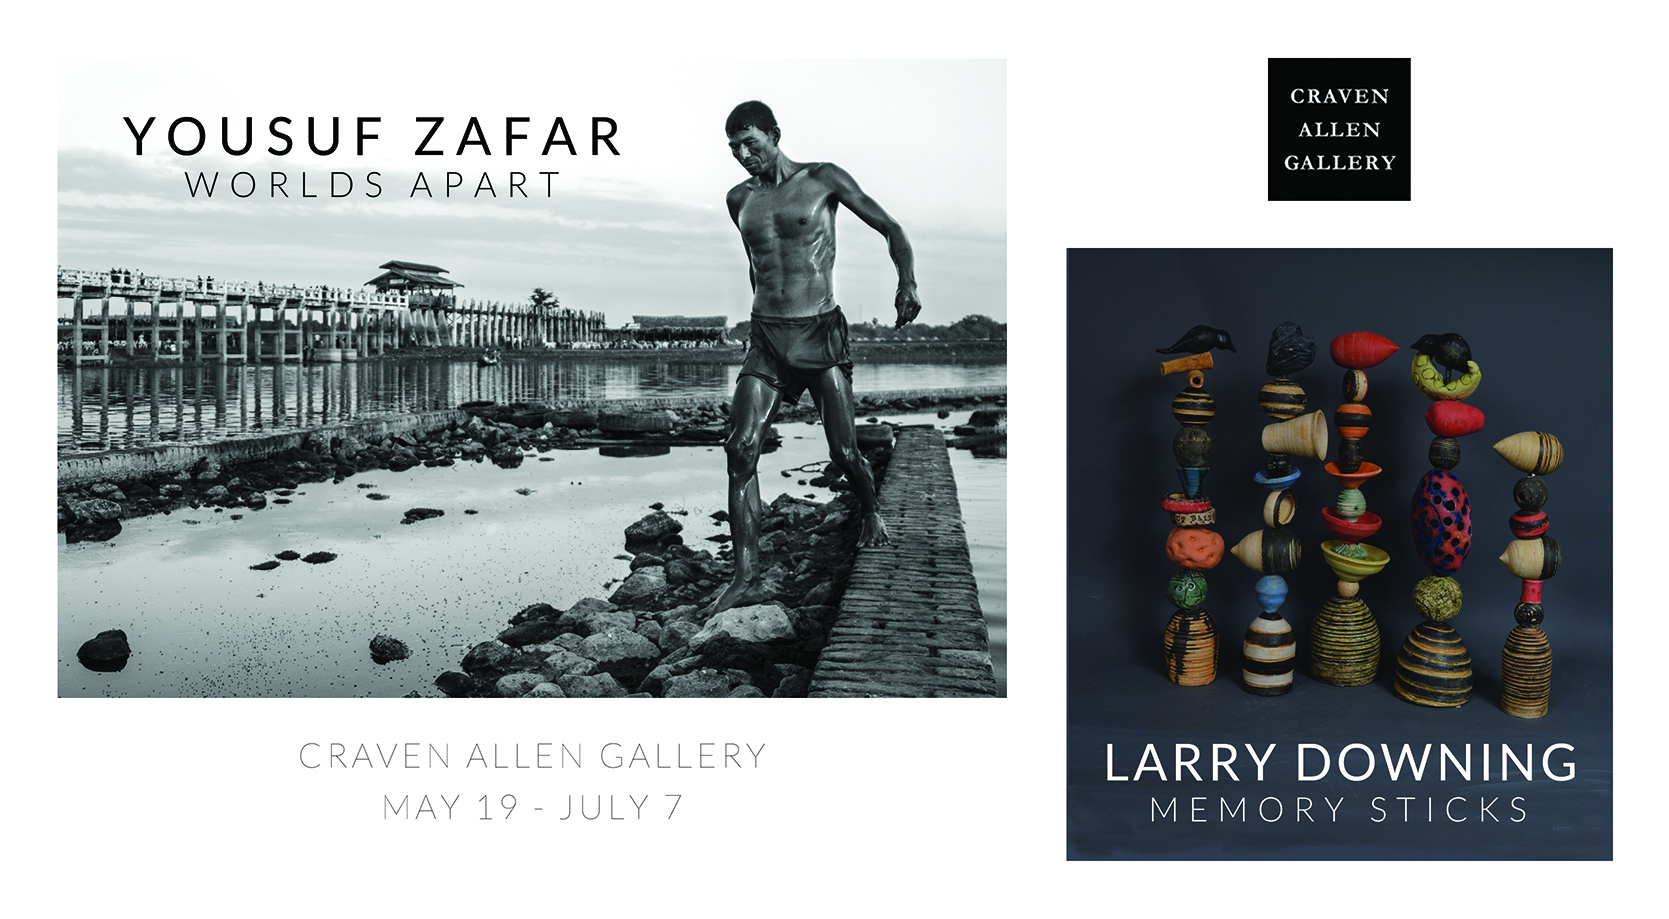 YOUSUF ZAFAR: WORLDS APART & LARRY DOWNING: MEMORY STICKS at Craven Allen Gallery